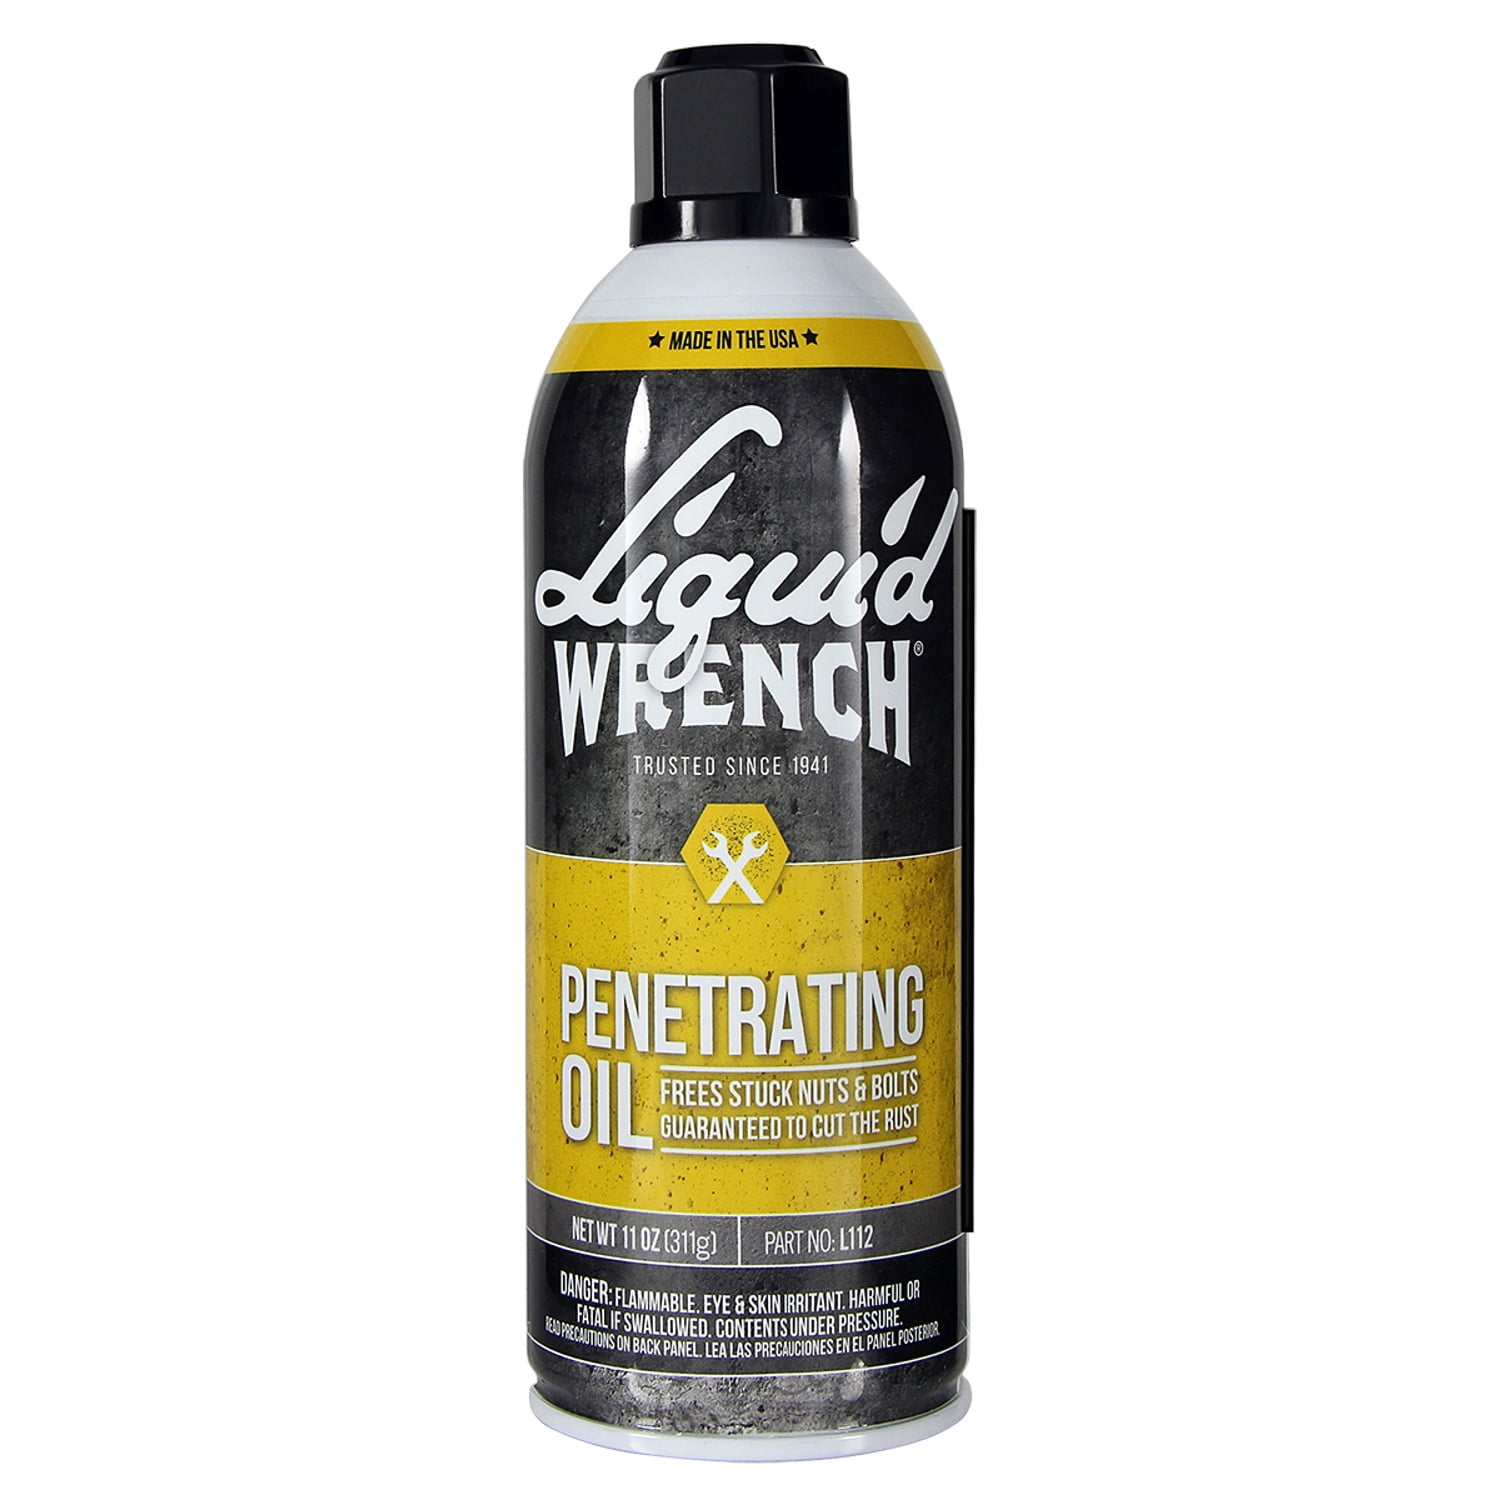 Liquid Wrench Penetrant Oil - Diversion Can Safe - Southwest Specialty  Products: Your Home Security and Diversion Can Safe Manufacturing Experts